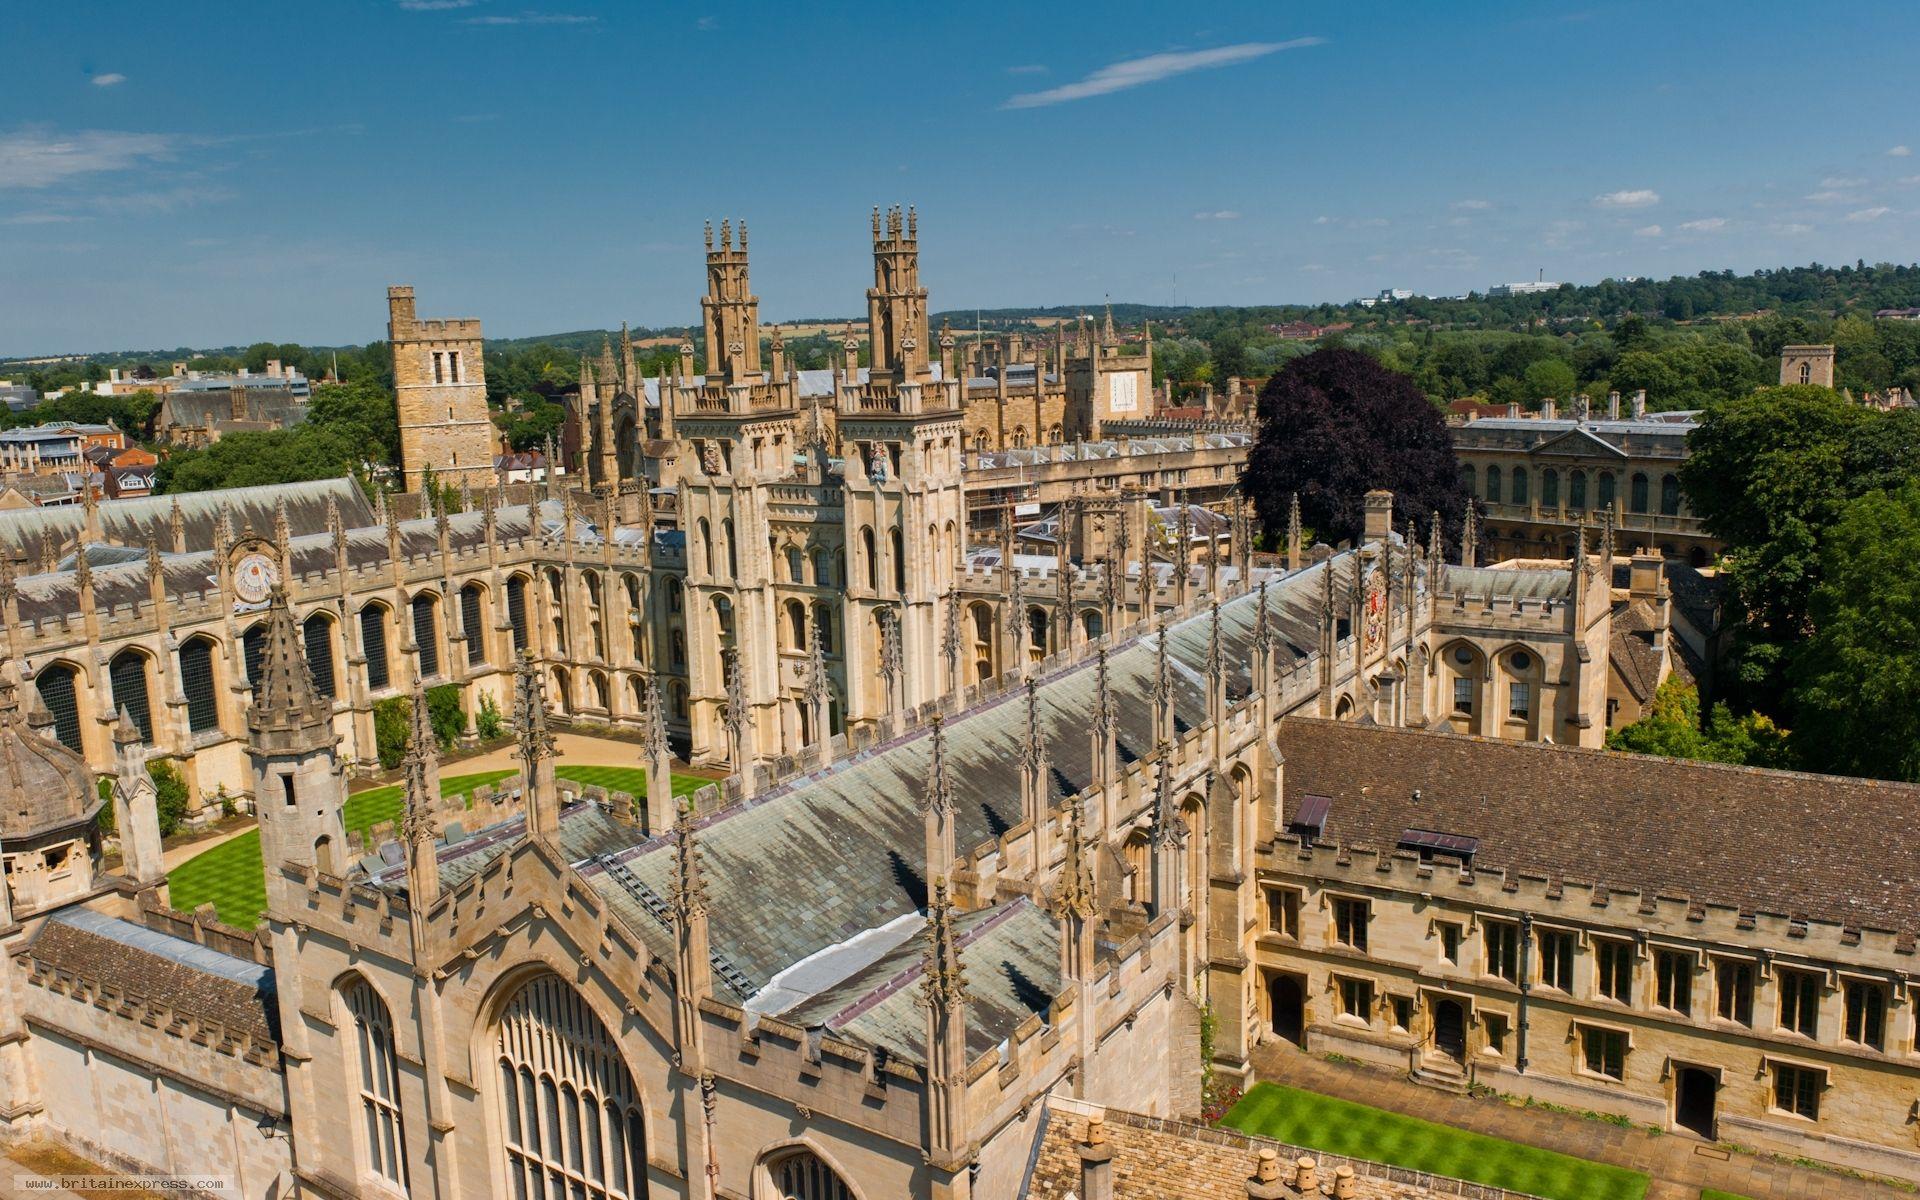 University Of Oxford Wallpaper in HD Quality